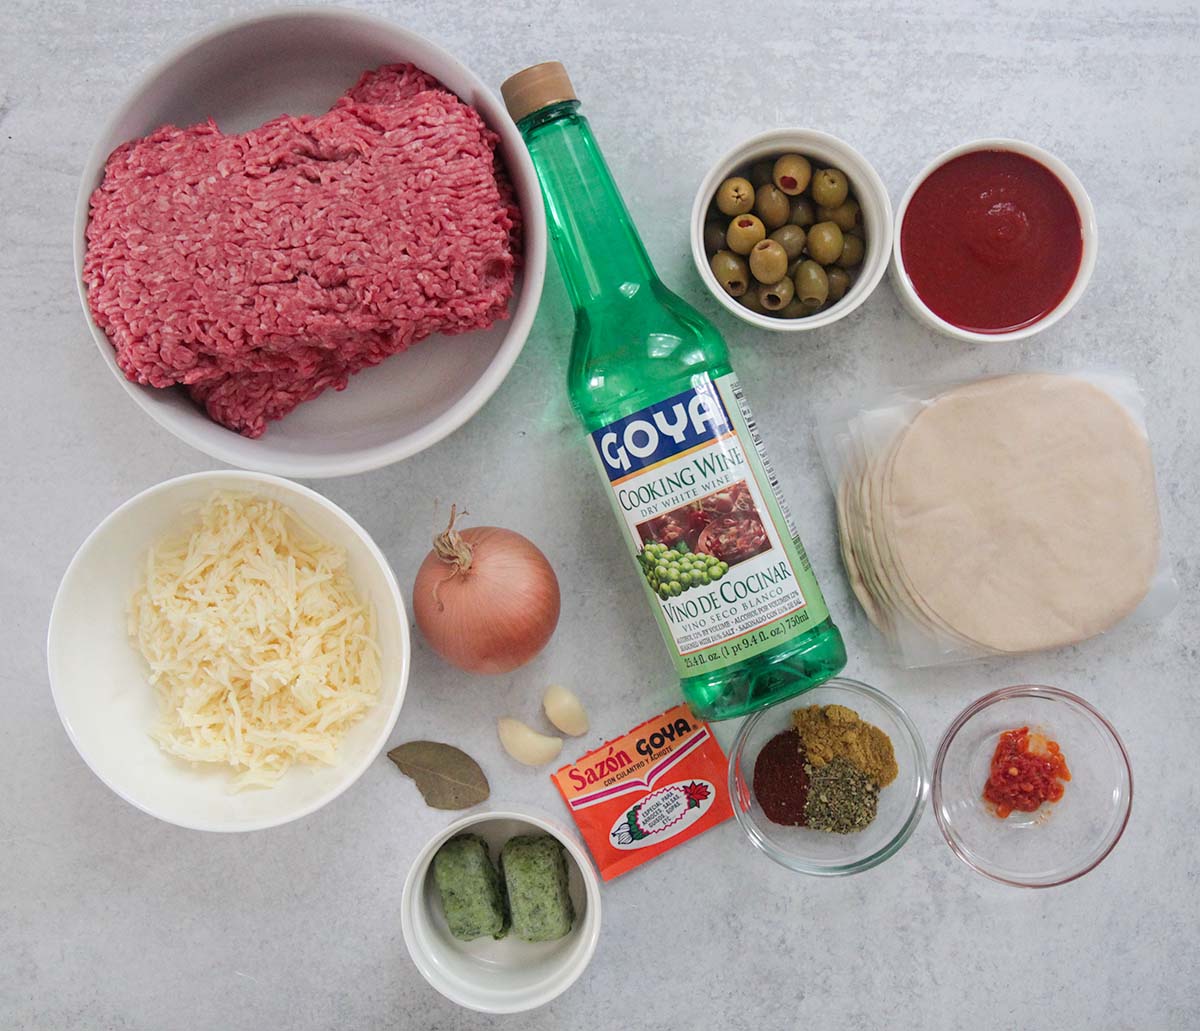 ingredients for empanadas. Beef, olives, cheese, spices, sofrito, cooking wine, onion, garlic, dough, sofrito, chili paste. 